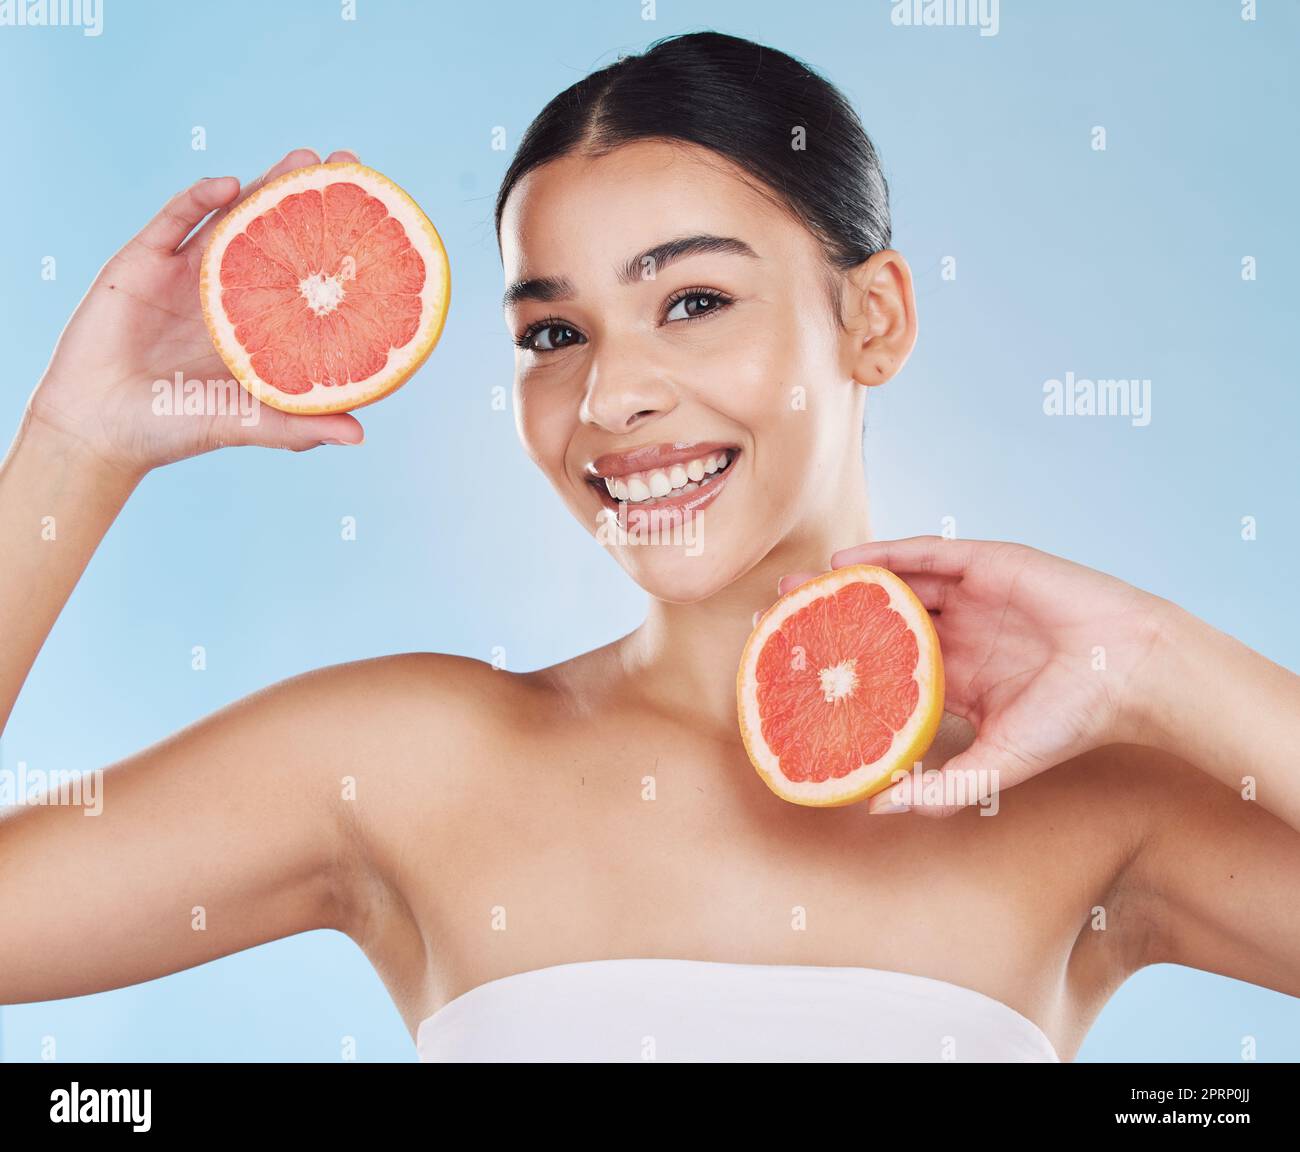 Grapefruit, skincare, face and diet wellness keeps her happy and healthy for skin healthcare, eat healthy fruit with nutrition. Portrait of a beauty woman in studio against a blue background Stock Photo